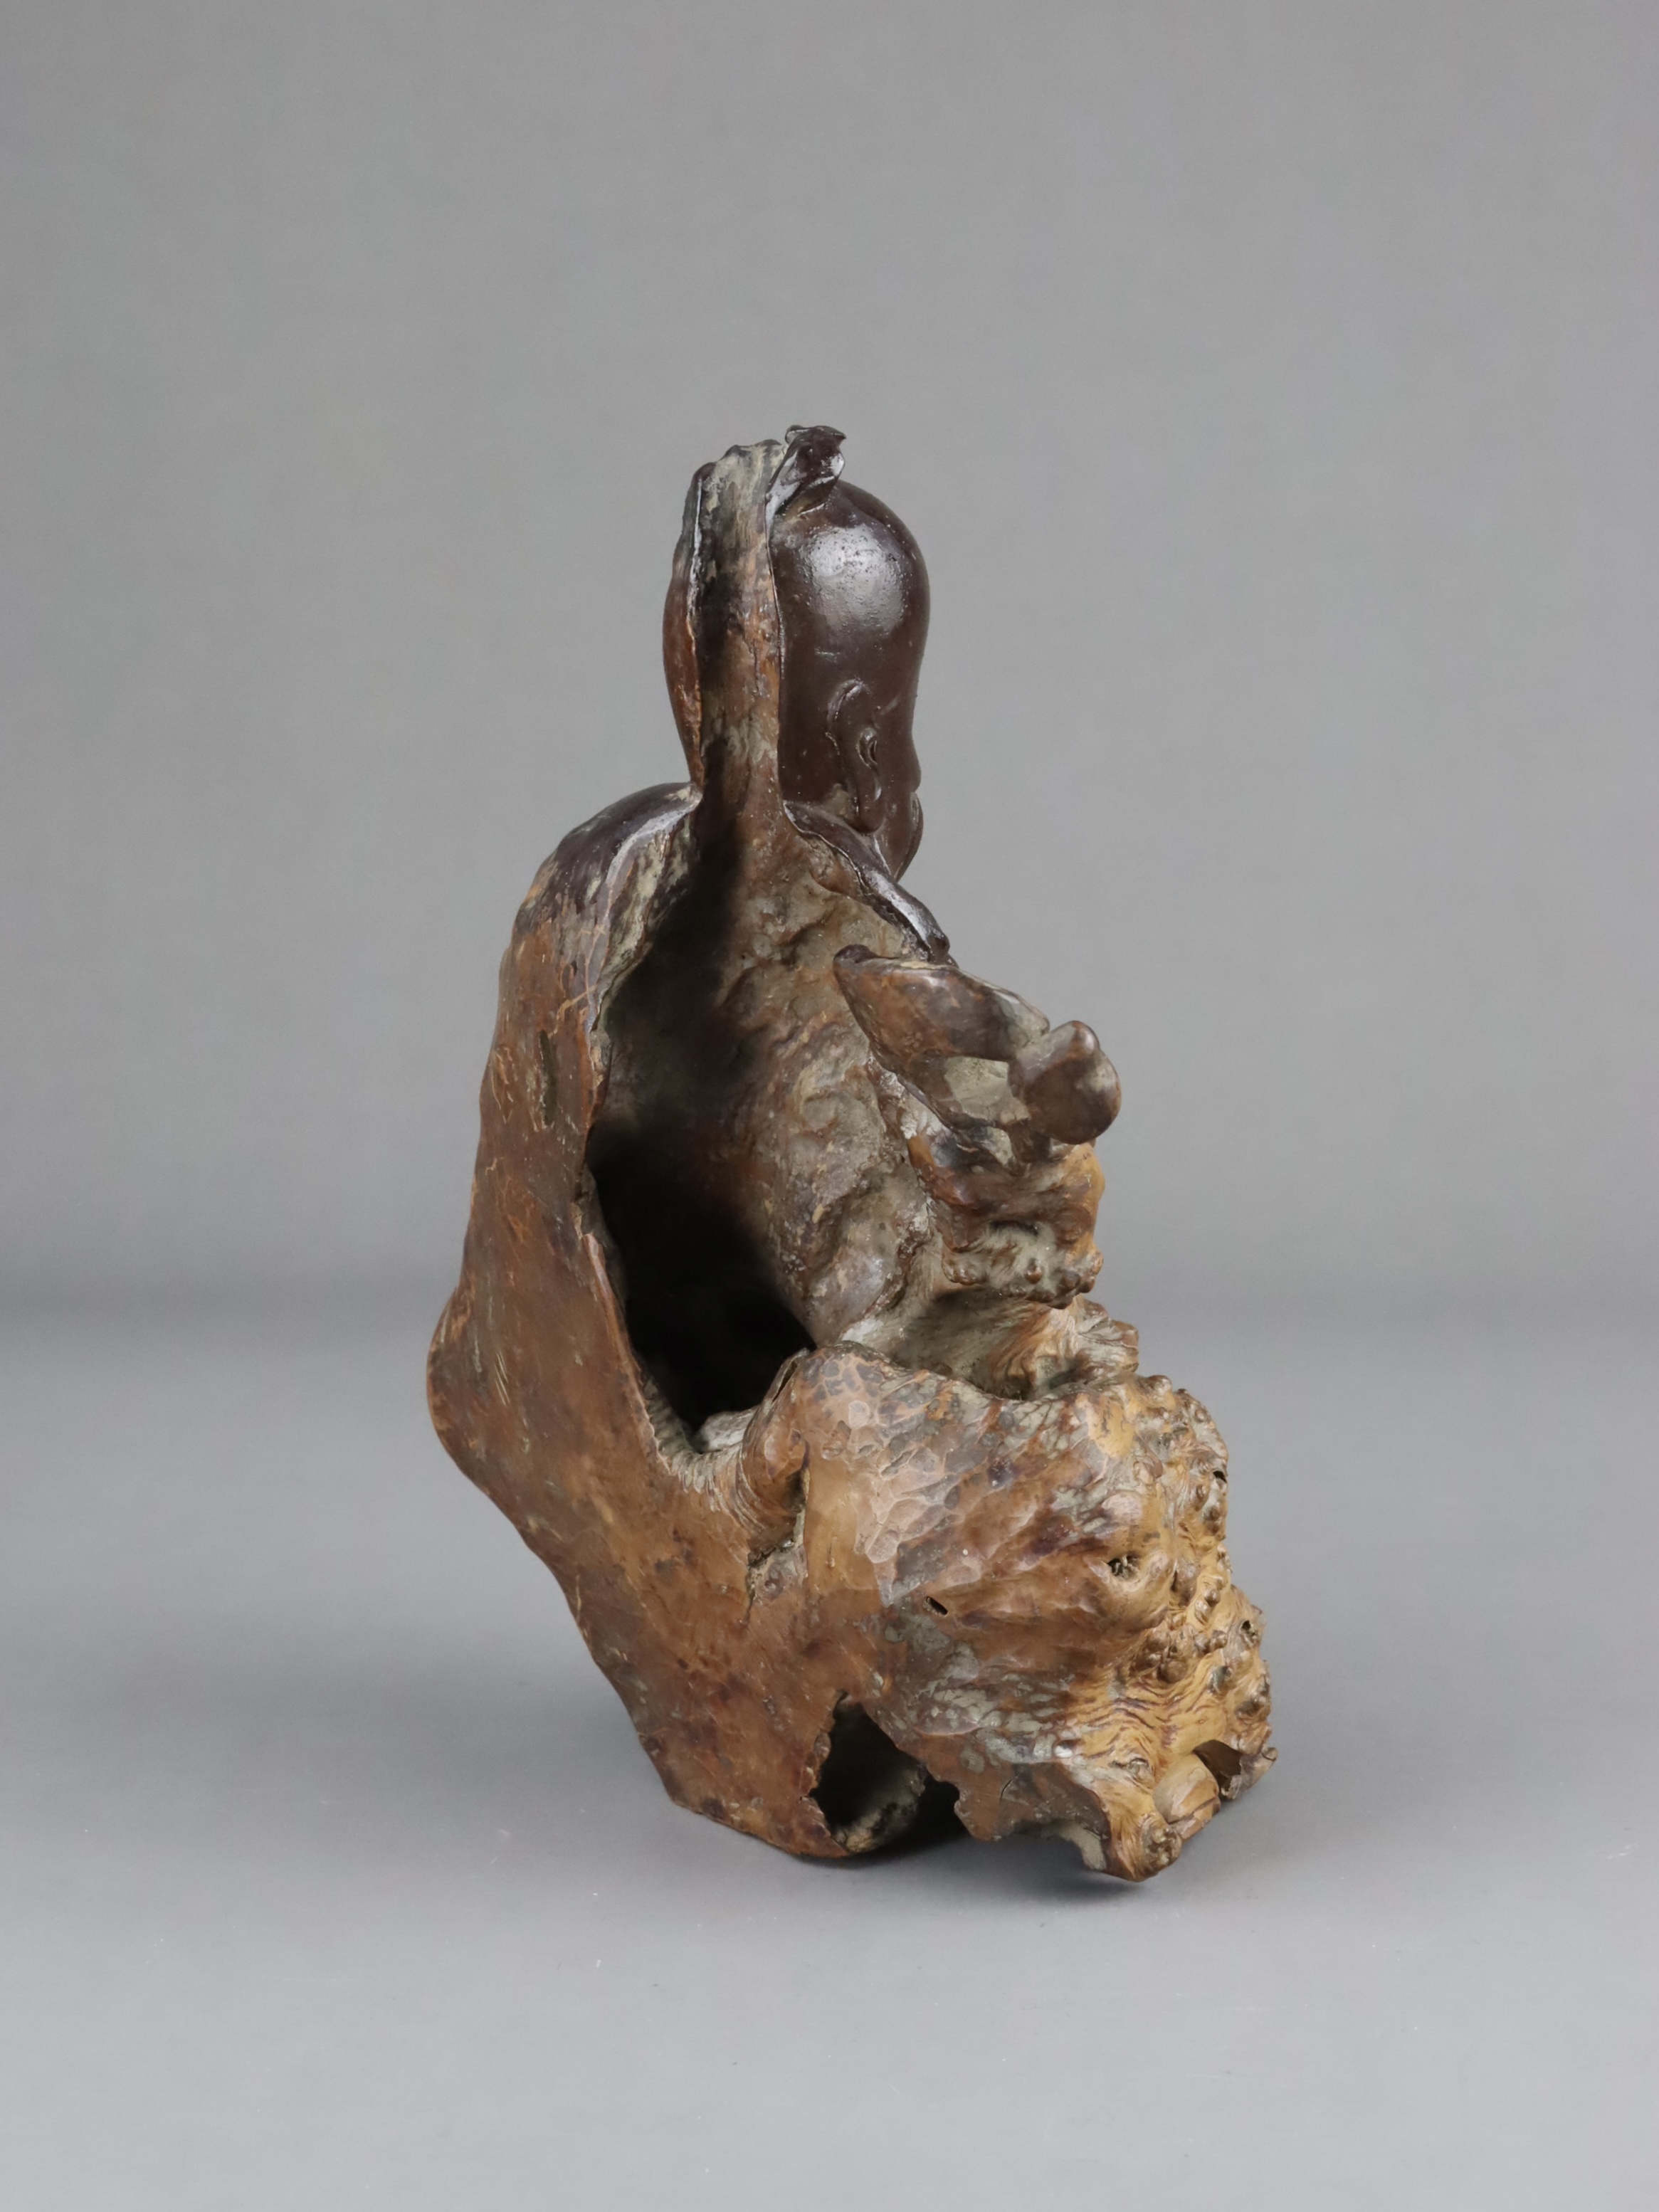 A Root Wood Carving of Shoulao, Qing dynasty - Image 3 of 11